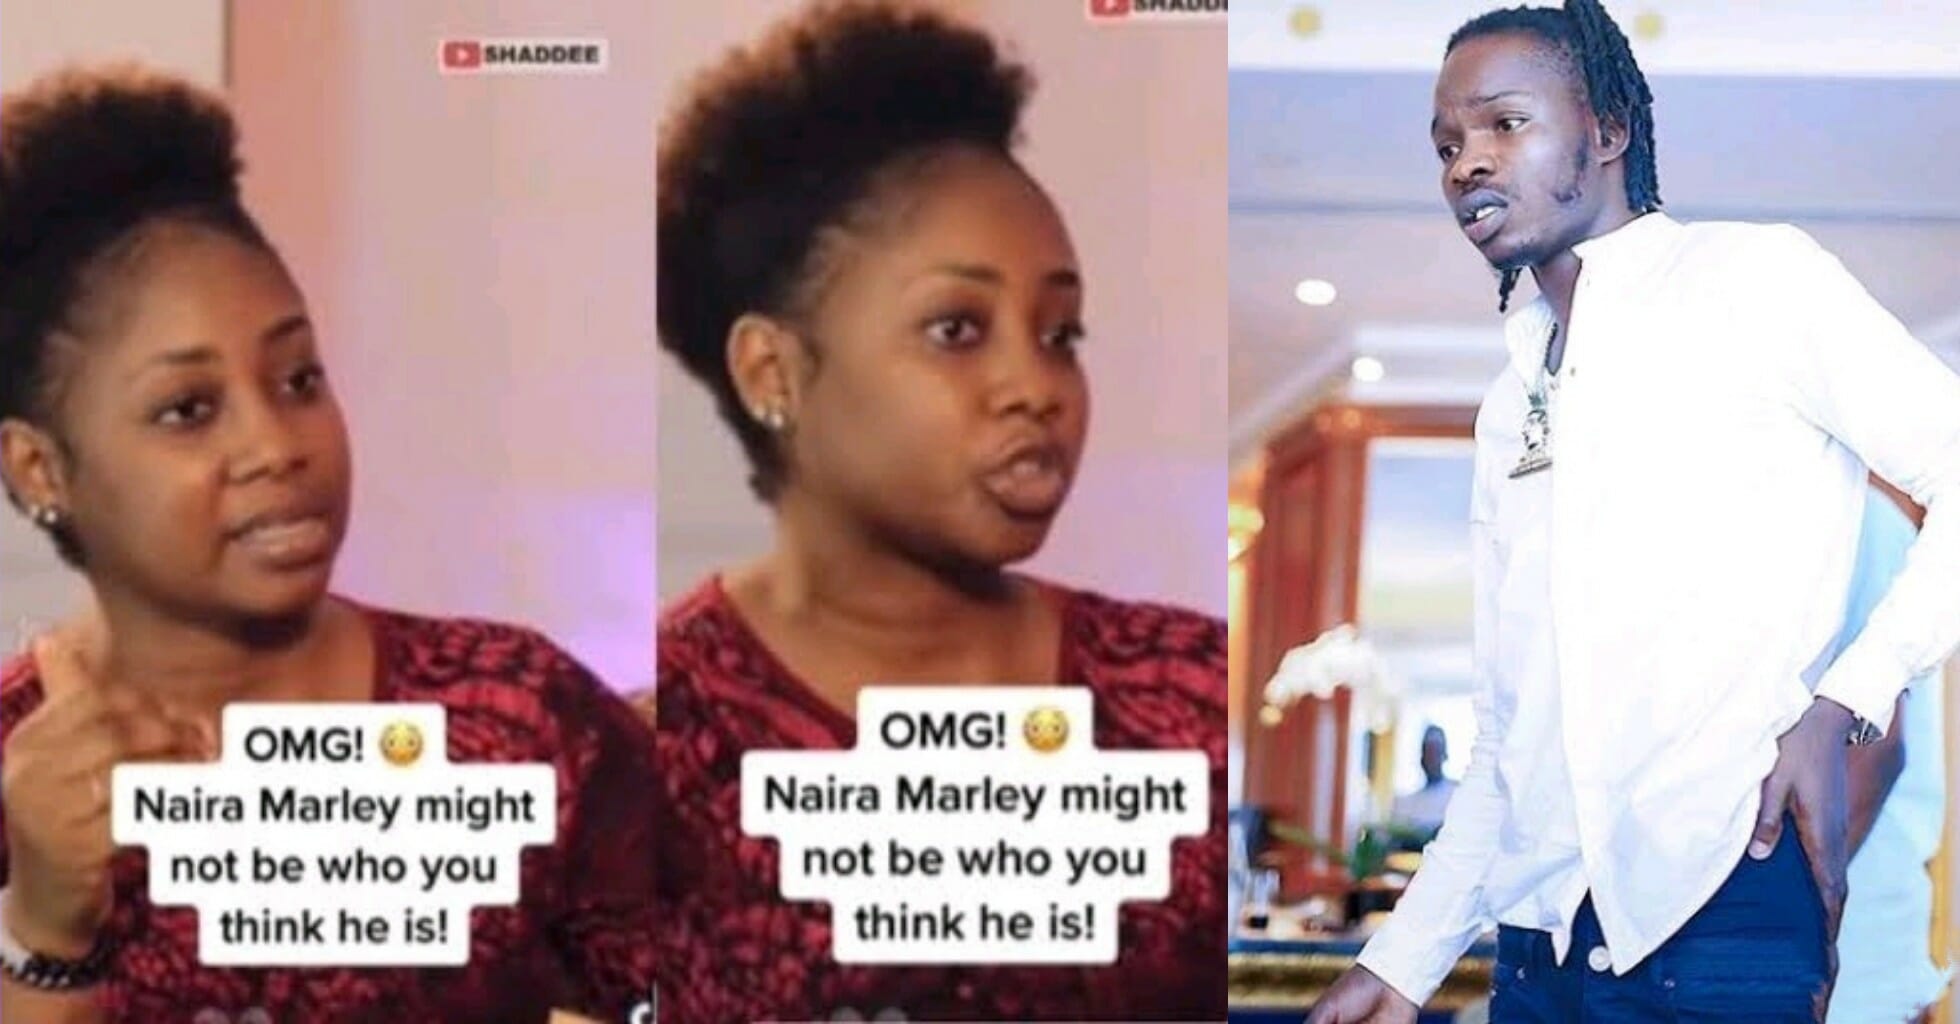 “6 days, he didn’t go out”, Lady who lived in Naira Marley’s compound spills his true nature – VIDEO